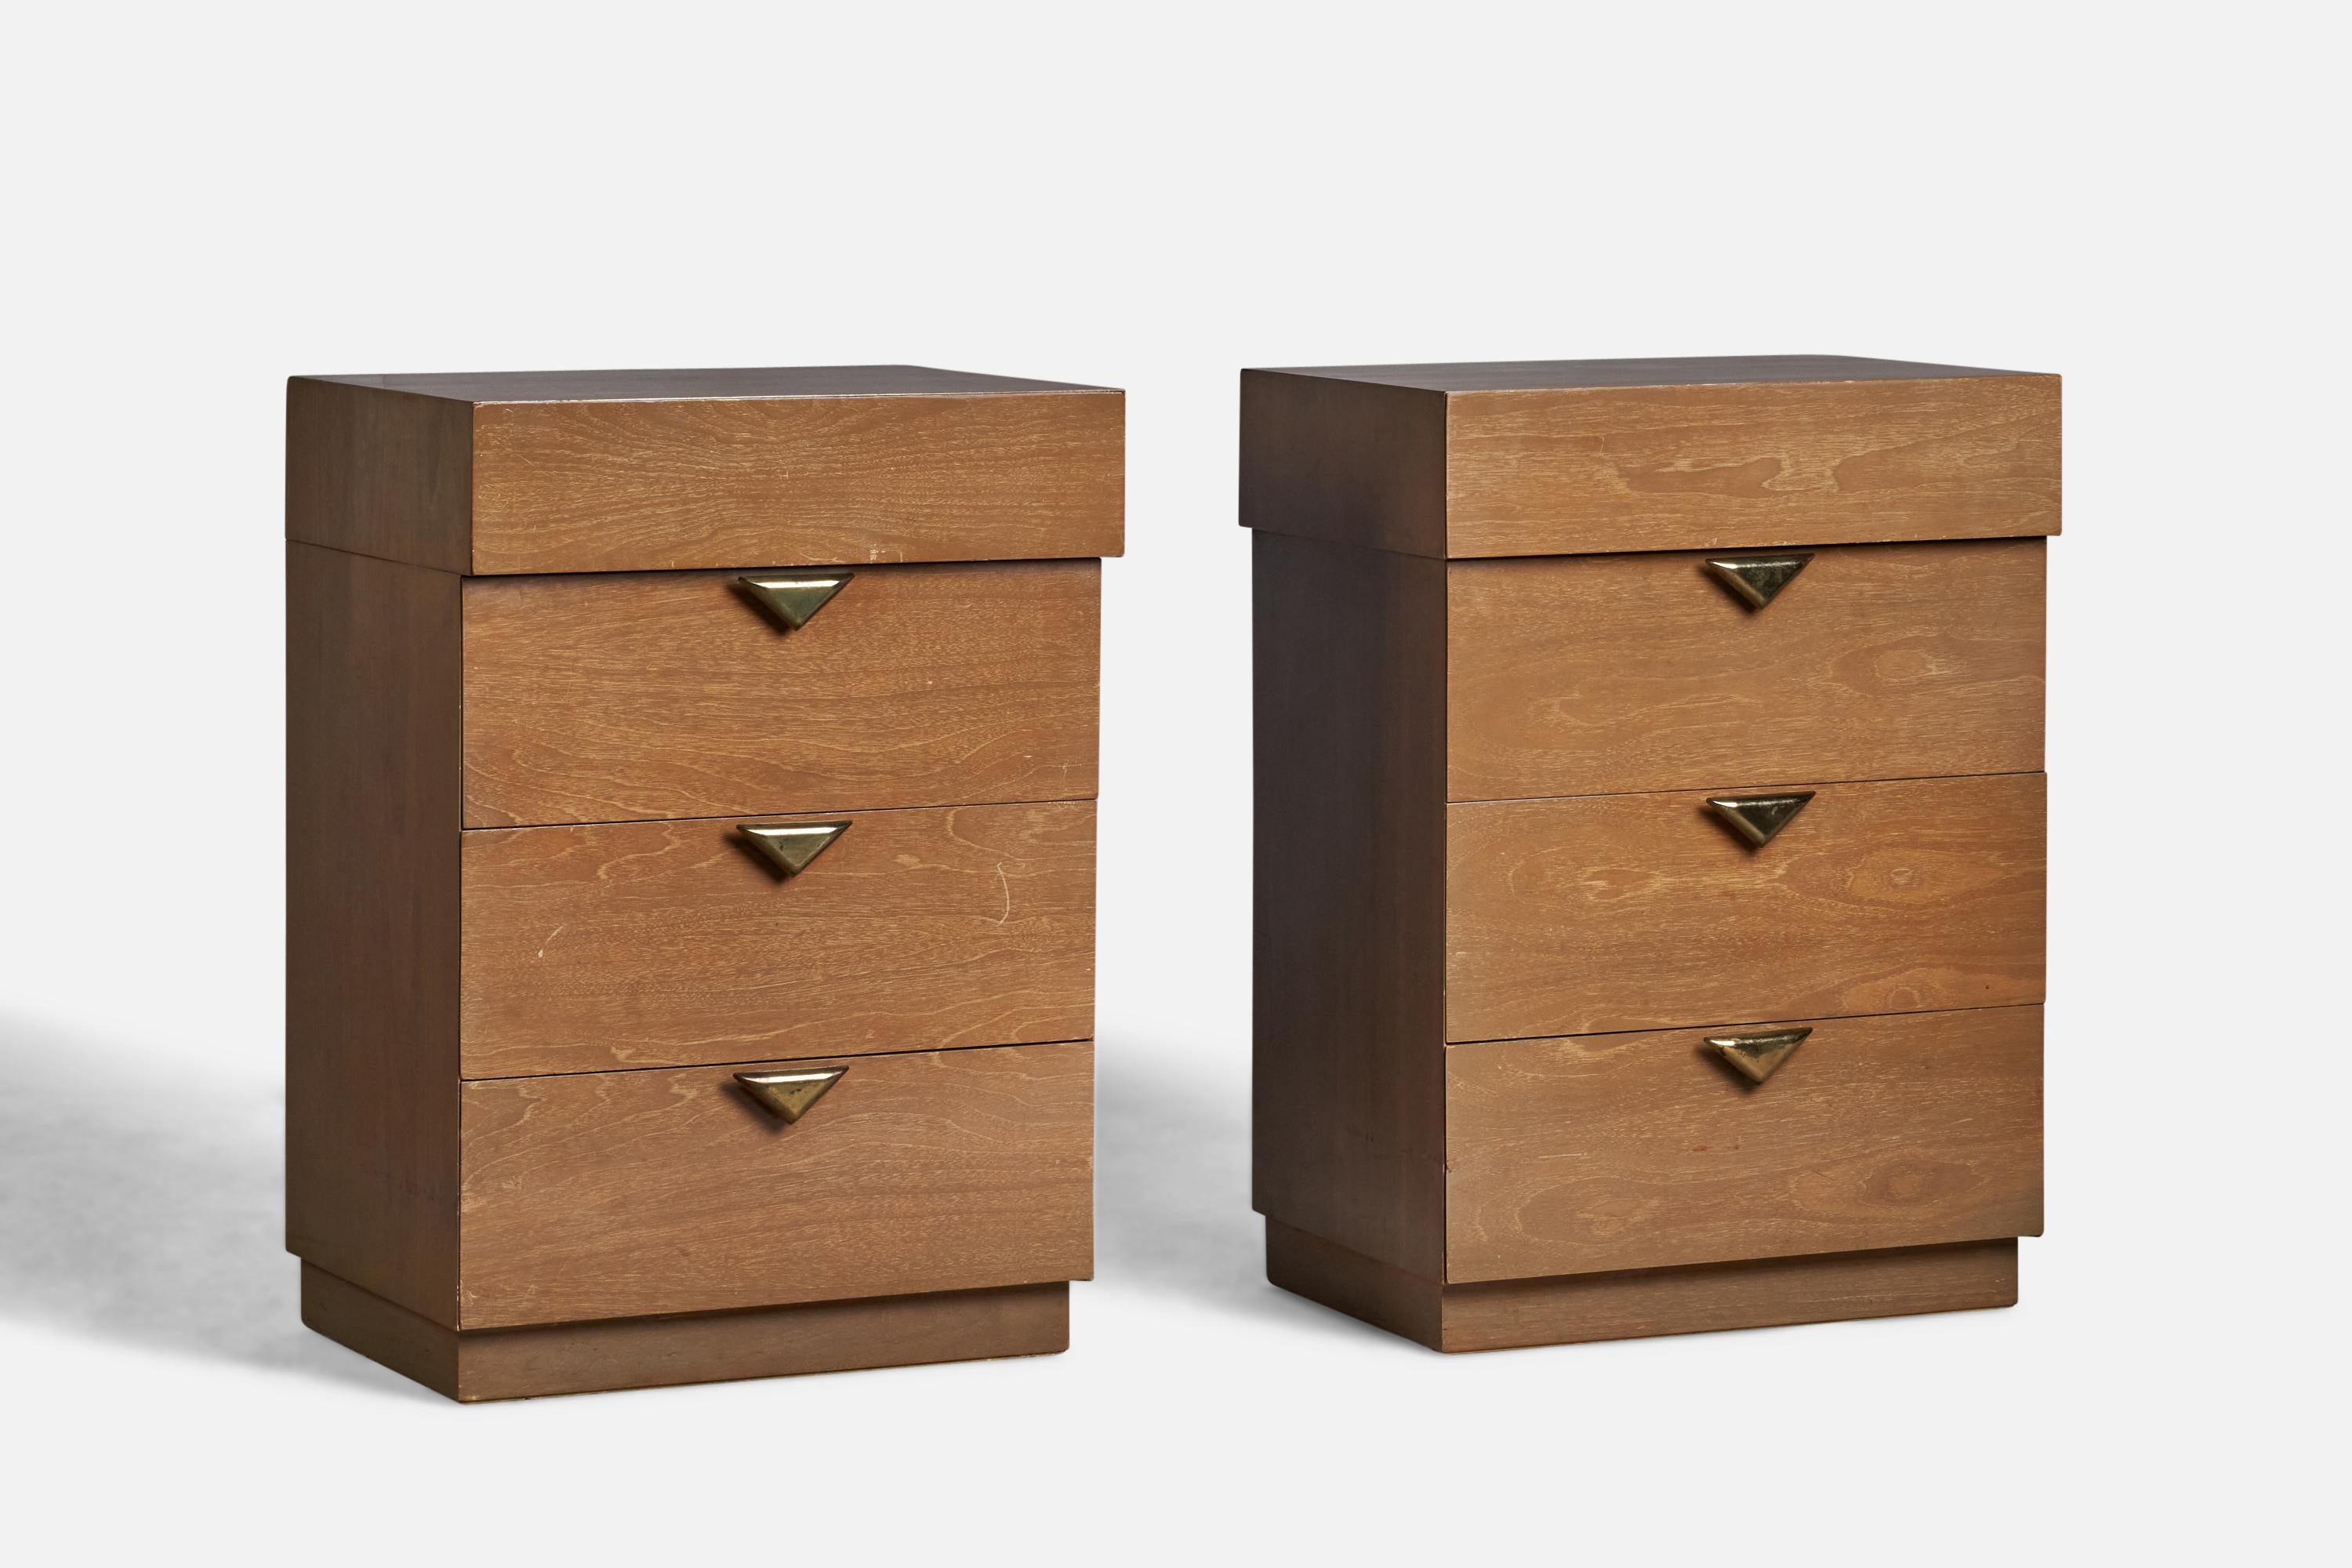 A pair of walnut and brass nightstands designed and produced in the US, 1950s.

“HEATHER WALNUT 5060” stamp on back
